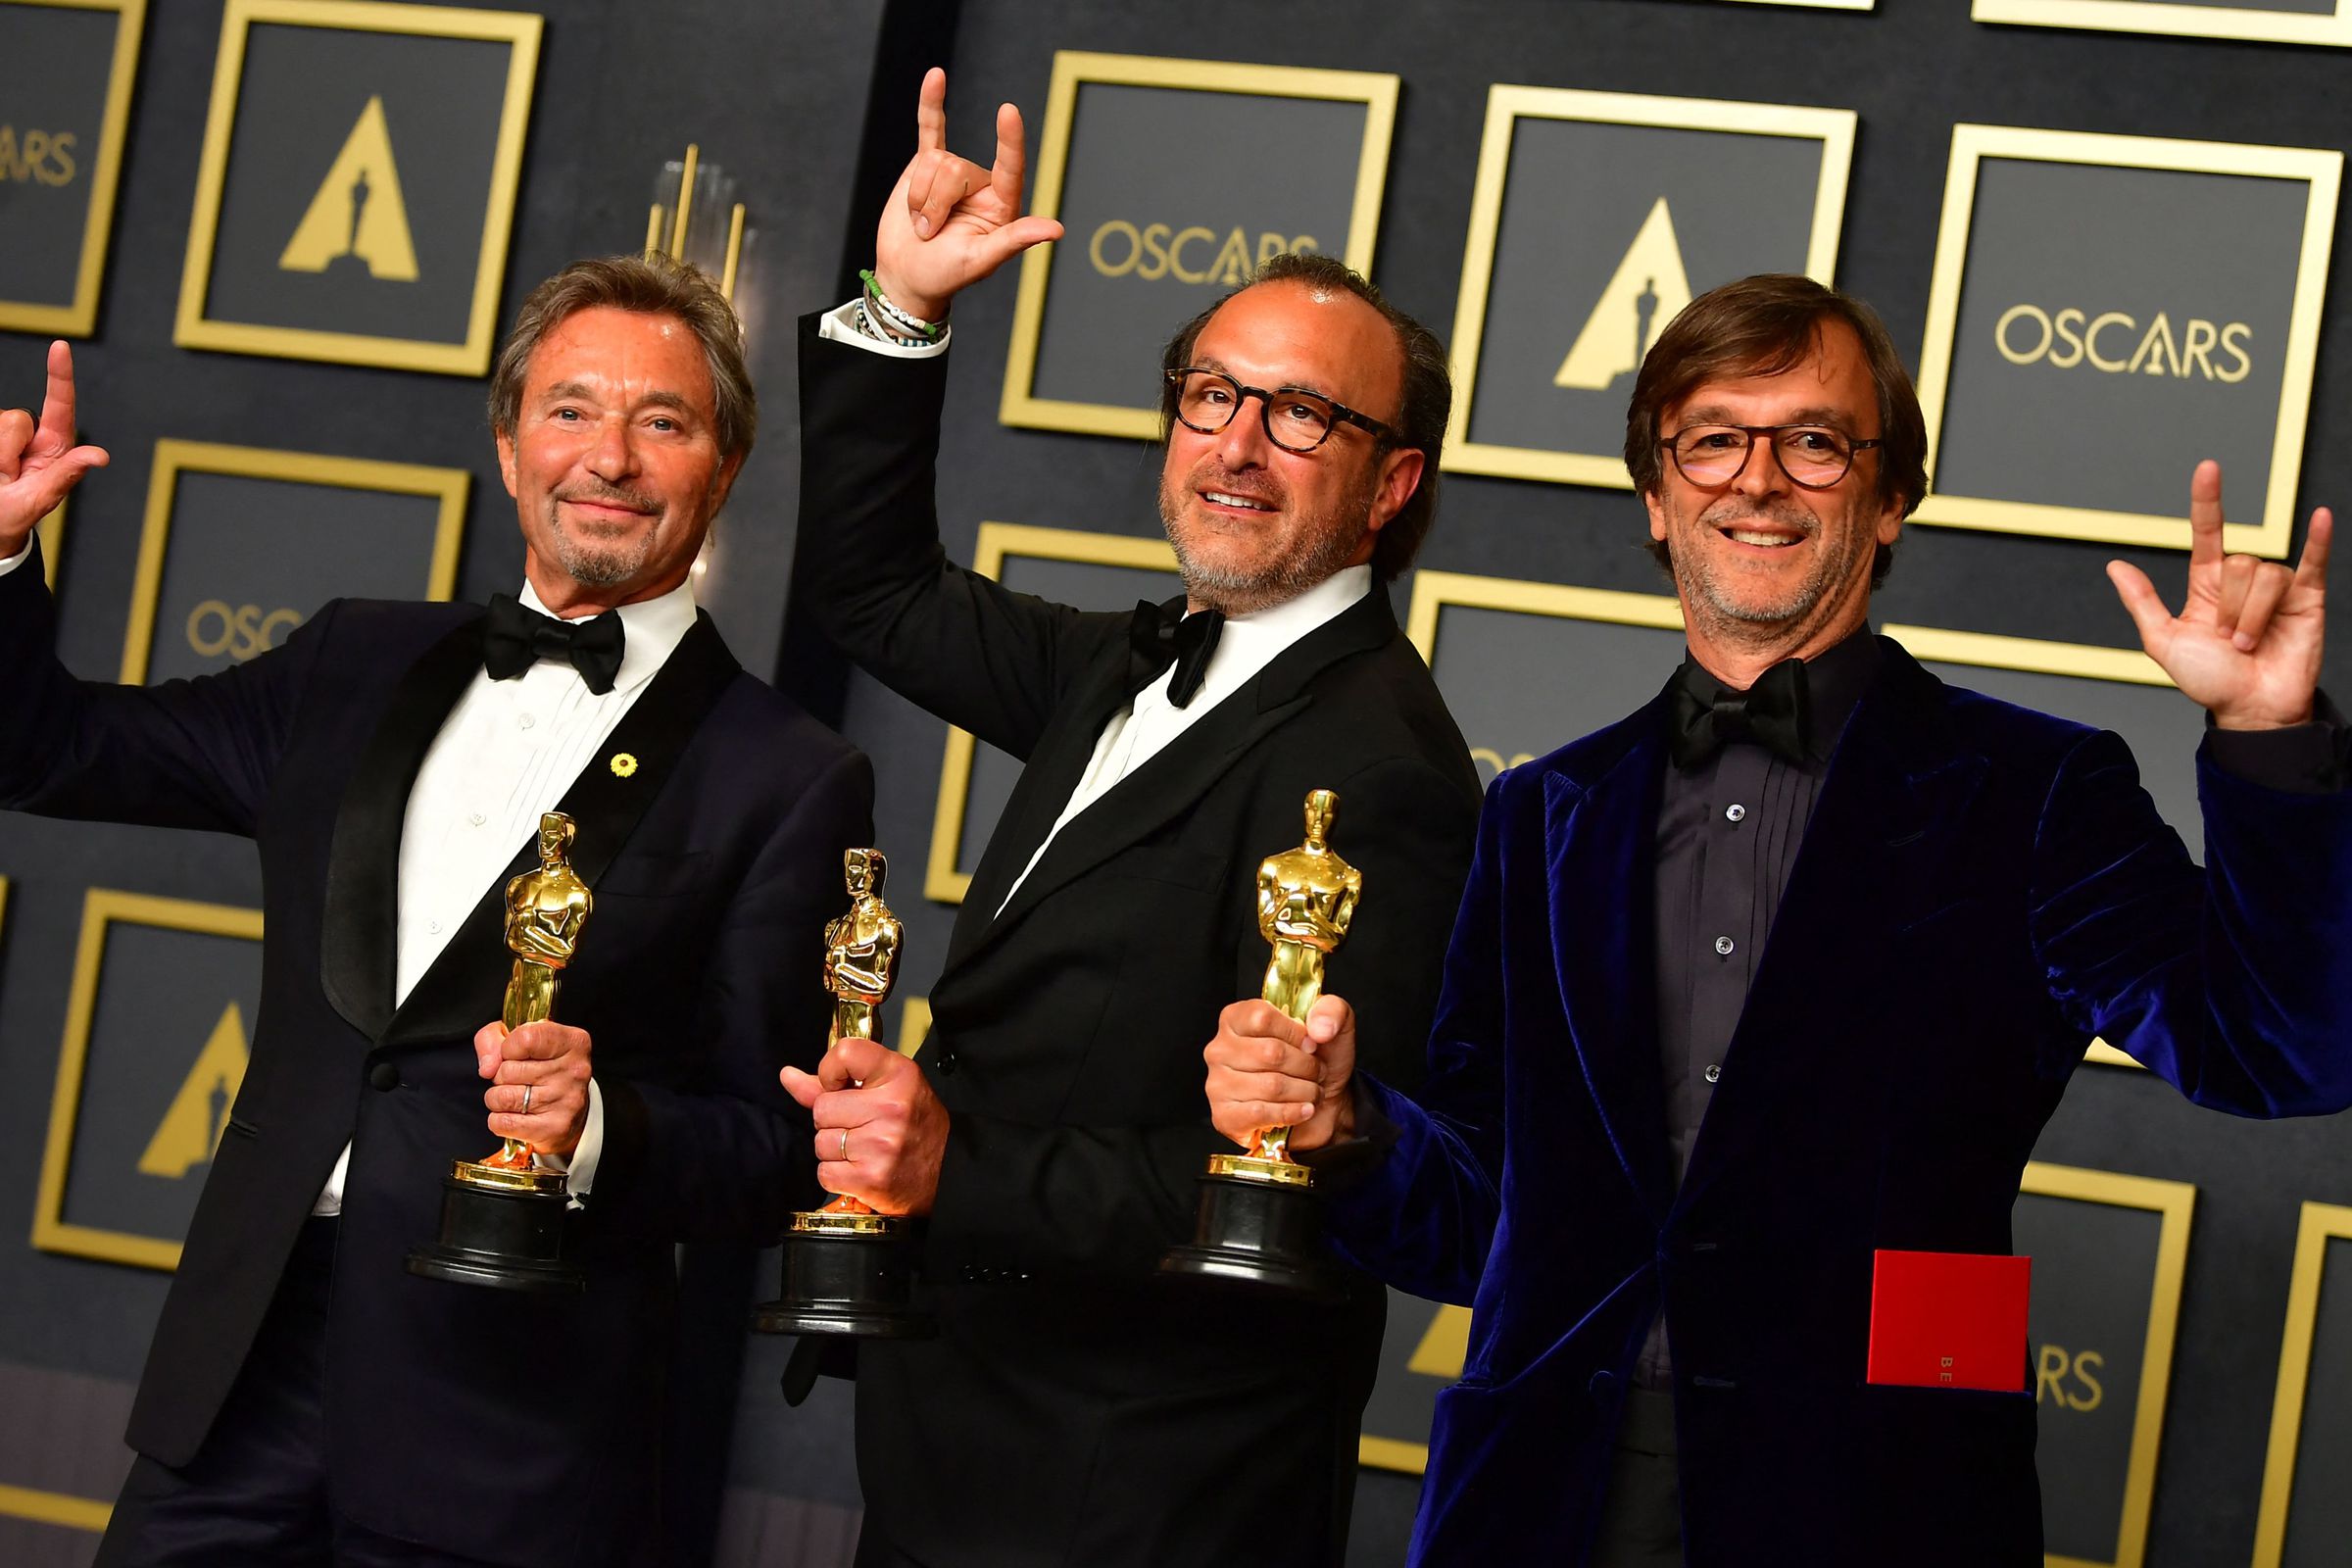 Coda producers Philippe Rousselet (L), Fabrice Gianfermi (R) and Patrick Wachsberger (C) posing with Code’s Best Picture award.